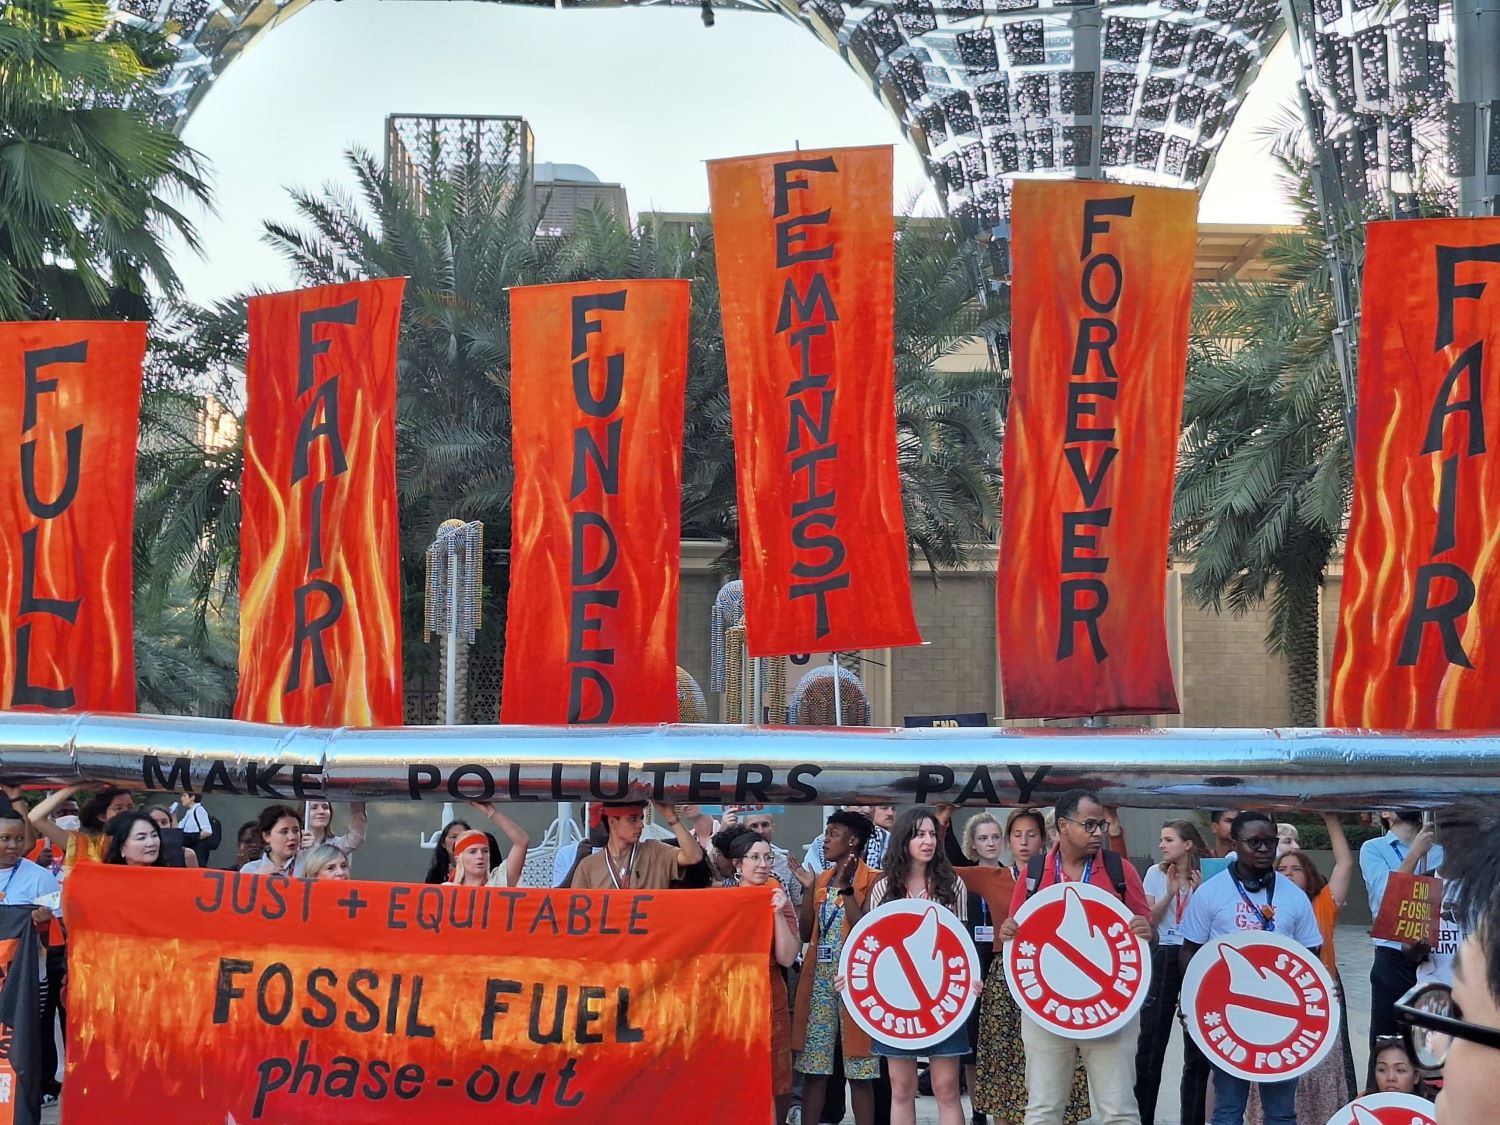 A group of people of varying races and gender presentations stand together at an outdoor protest. They are holding banners with firing background colors that read "Full, Fair, Funded, Feminist, and Forever" as well as "Just + Equitable Fossil Fuel Phase-Out."